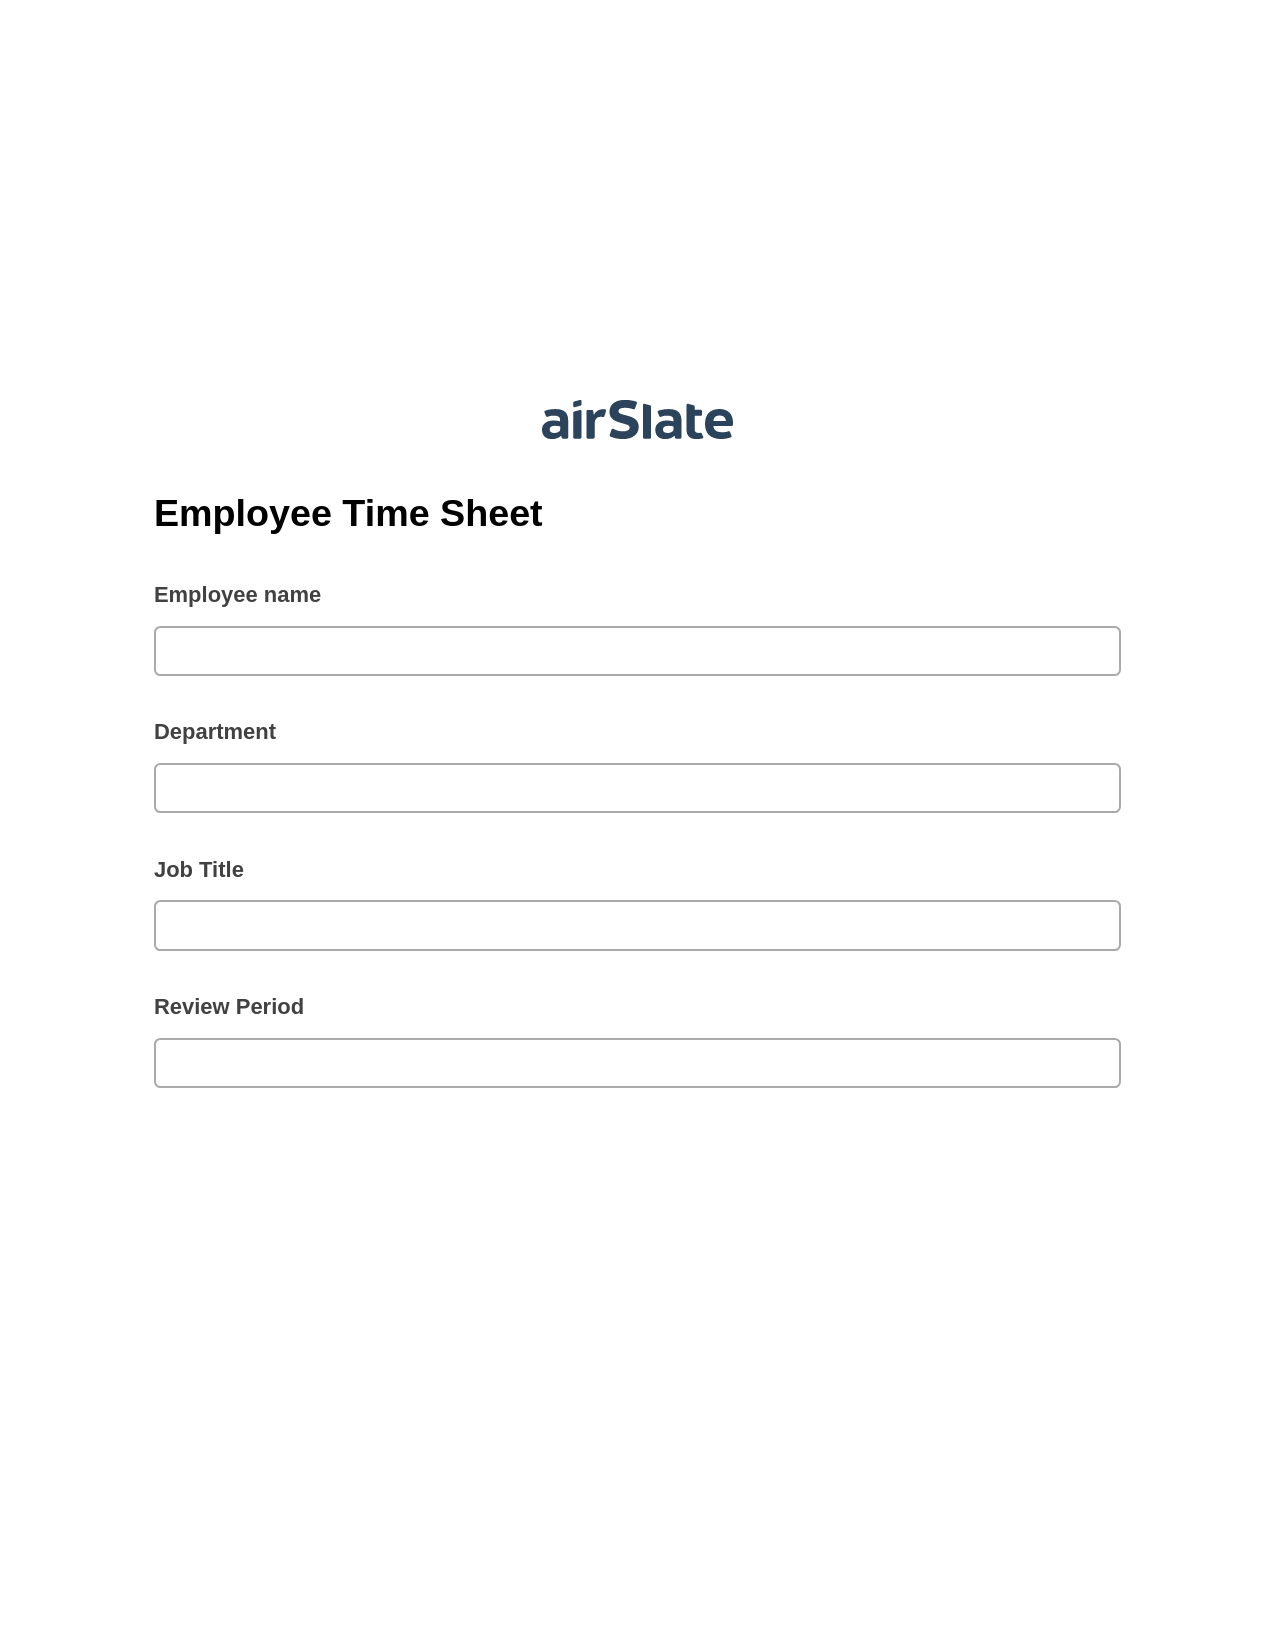 Employee Time Sheet Pre-fill Dropdowns from Airtable, Create slate addon, Export to NetSuite Bot